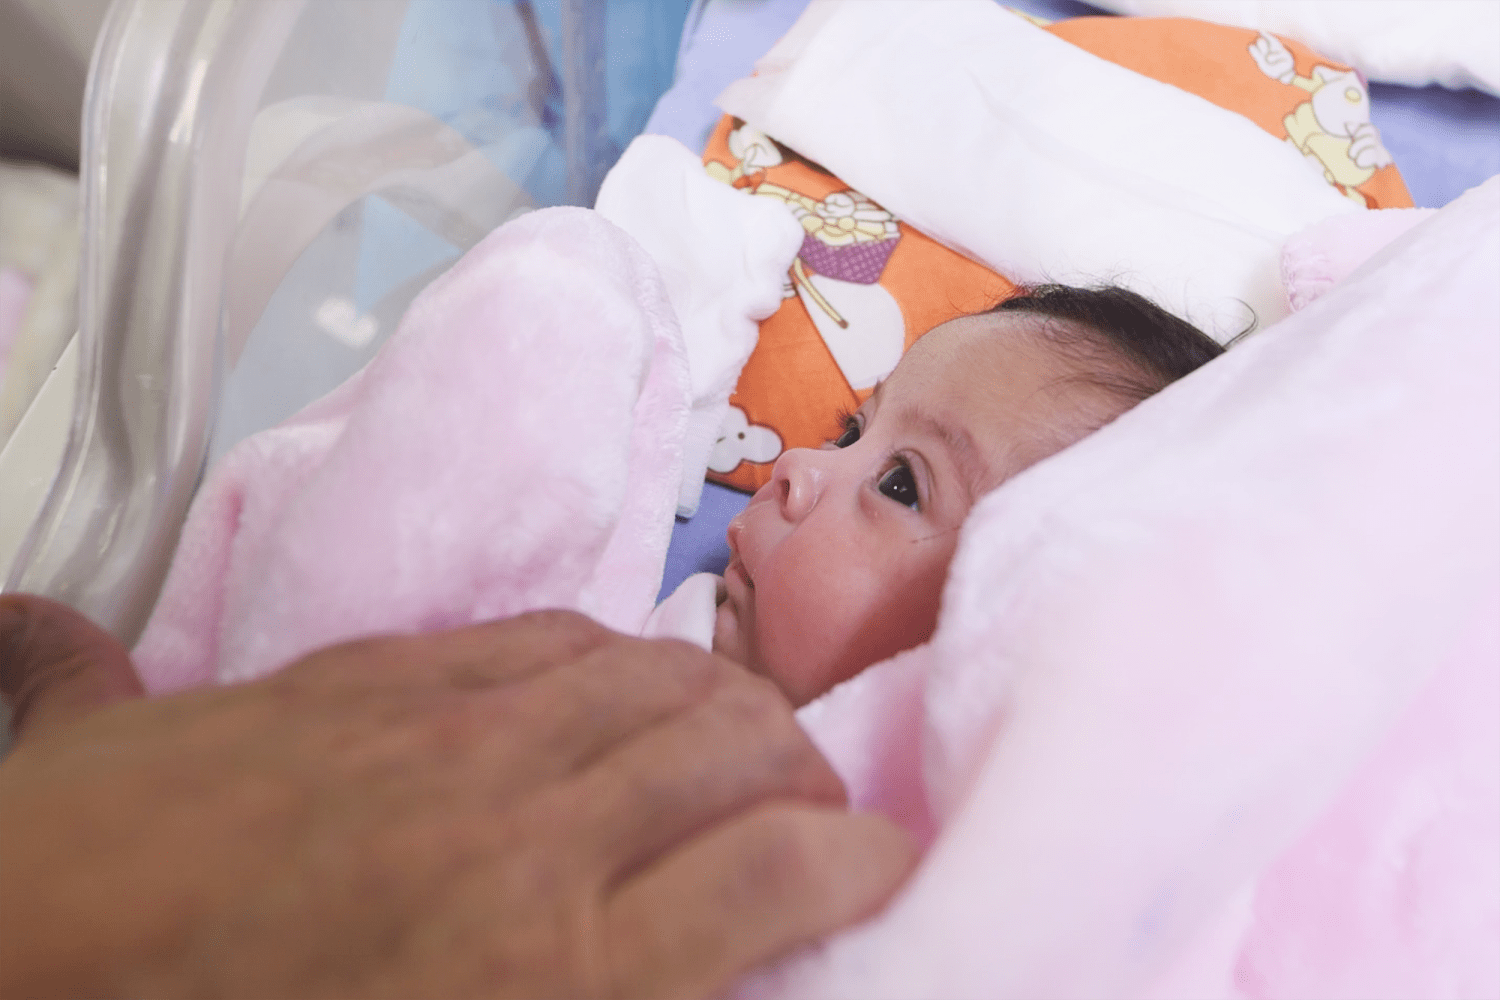 Her newborn triplets were ready to go home to Gaza from Israel, but war trapped them apart